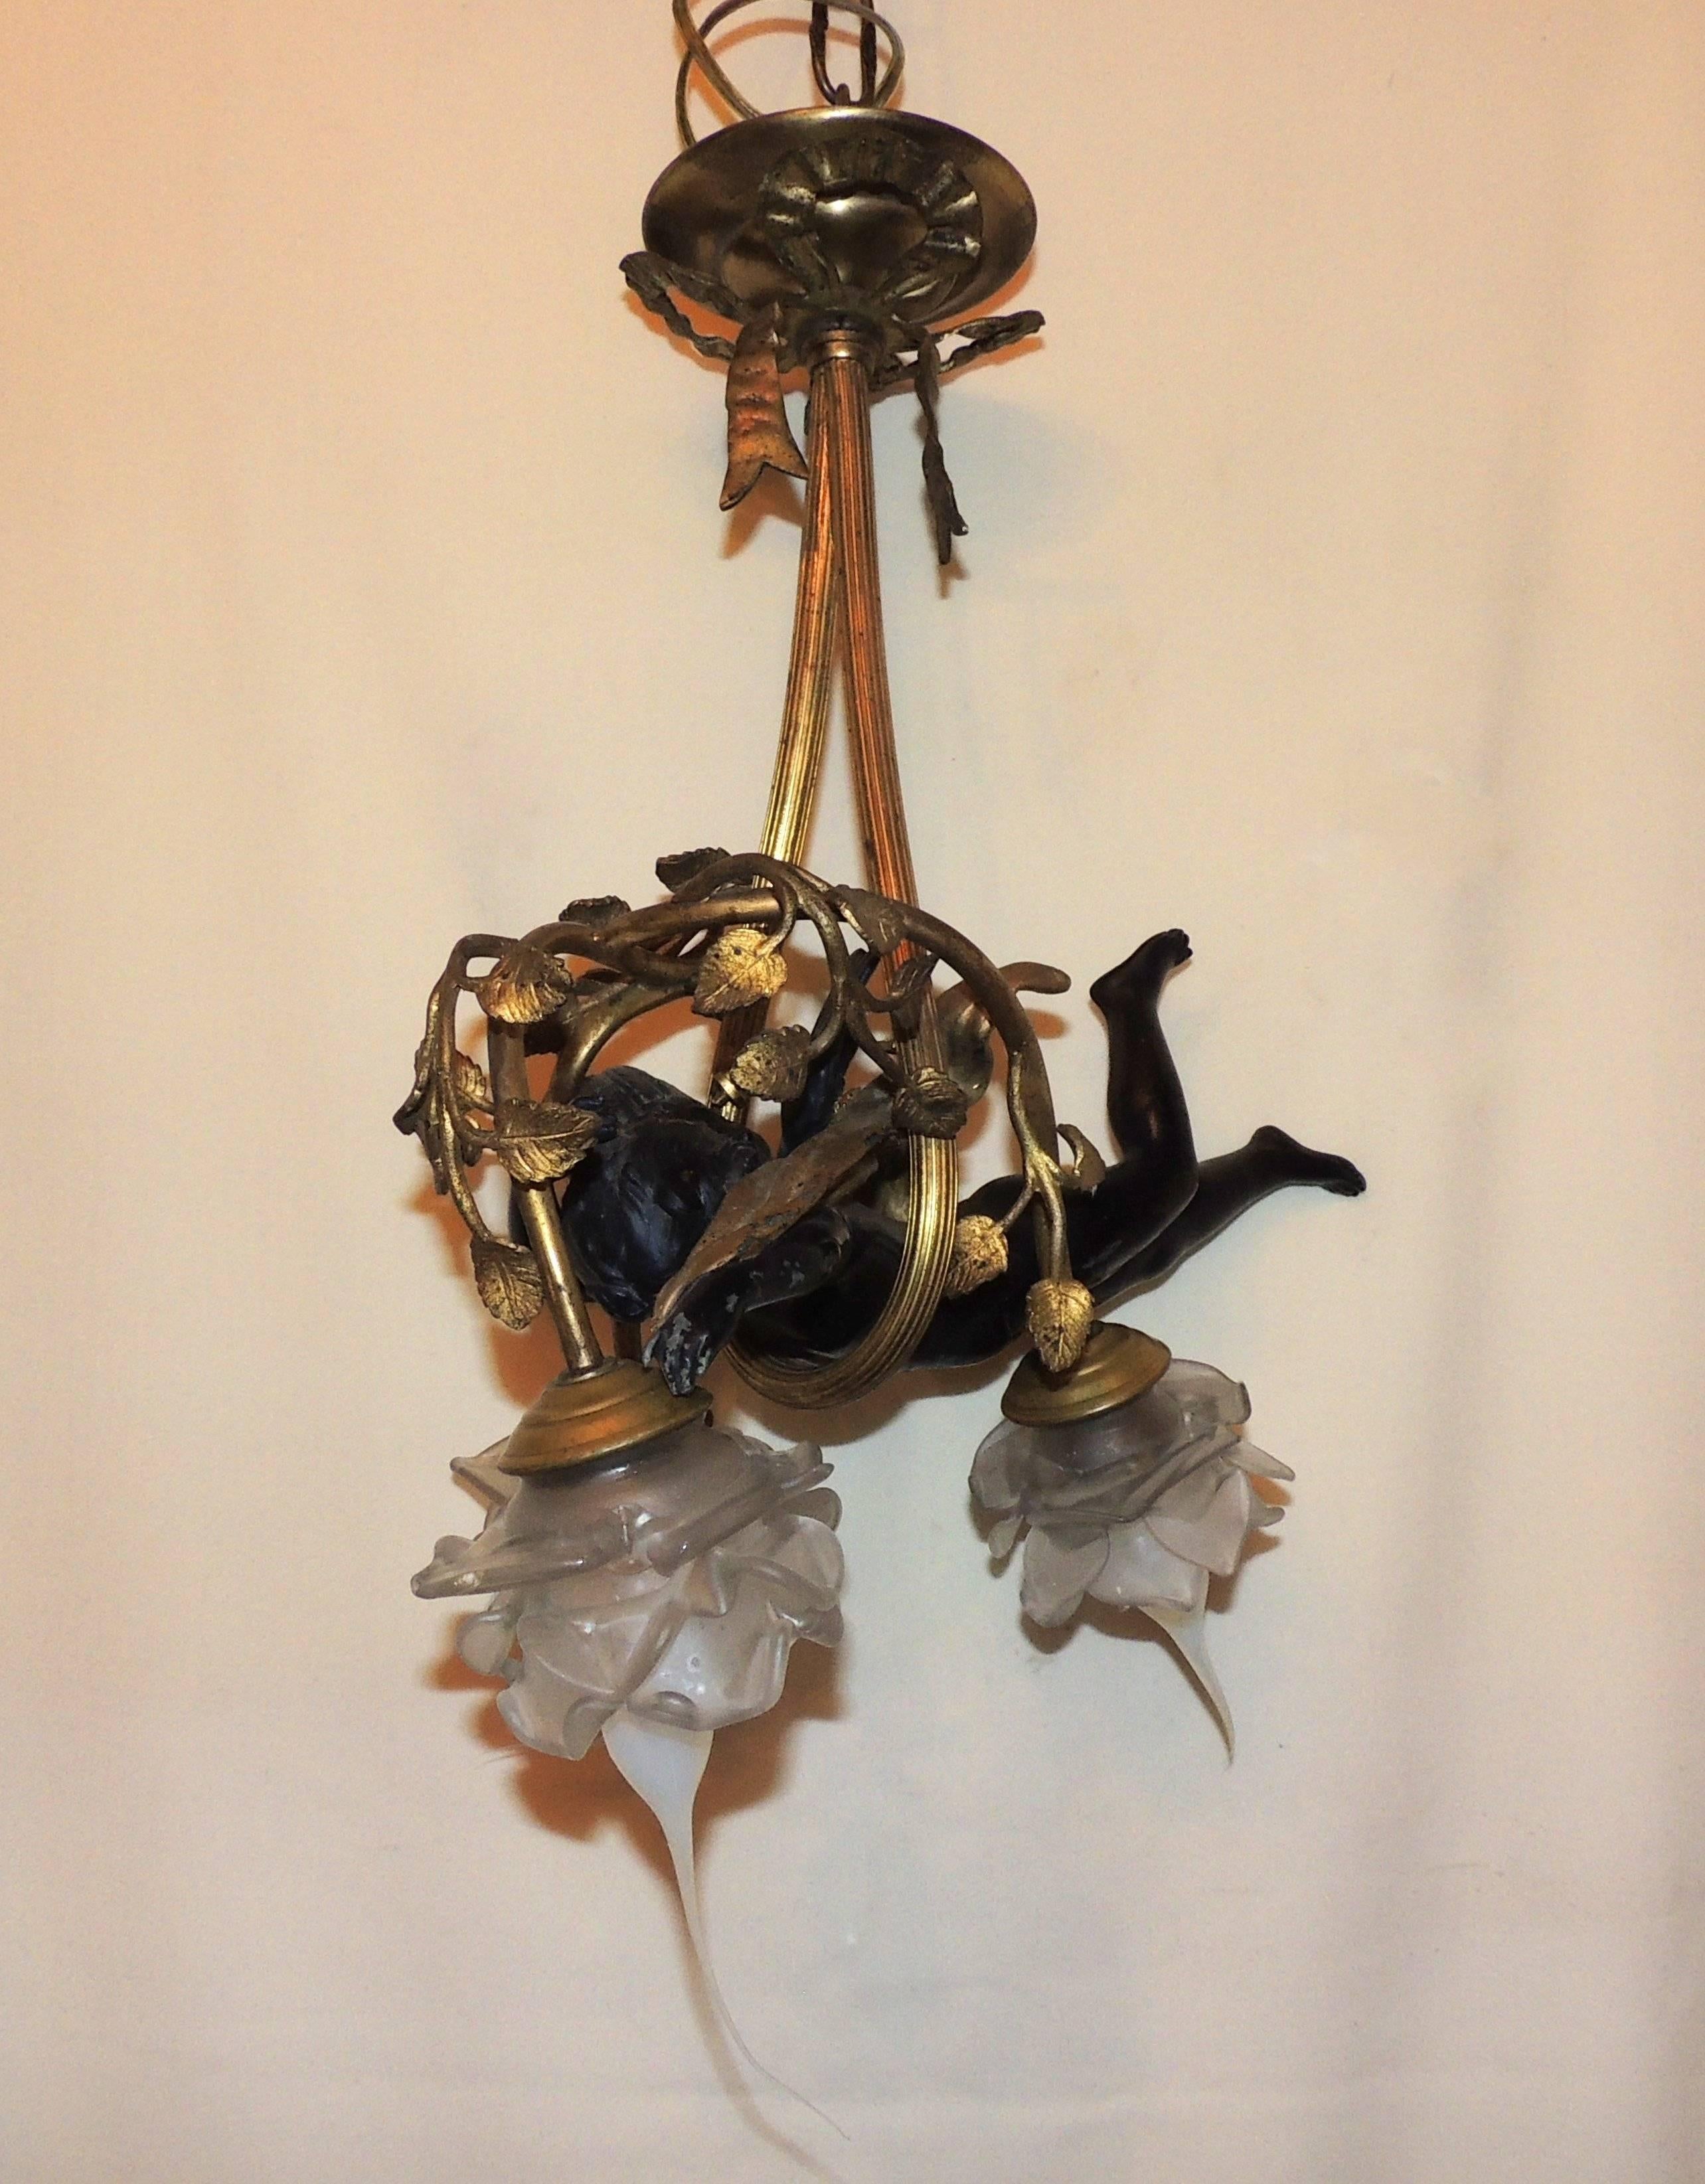 A lovely French doré bronze chandelier has a ribbon supporting the sweet cherub in the branches with three lights. Original frosted flower shades accent the leaf decorated branches.

Measures: 18" H x 10" W.